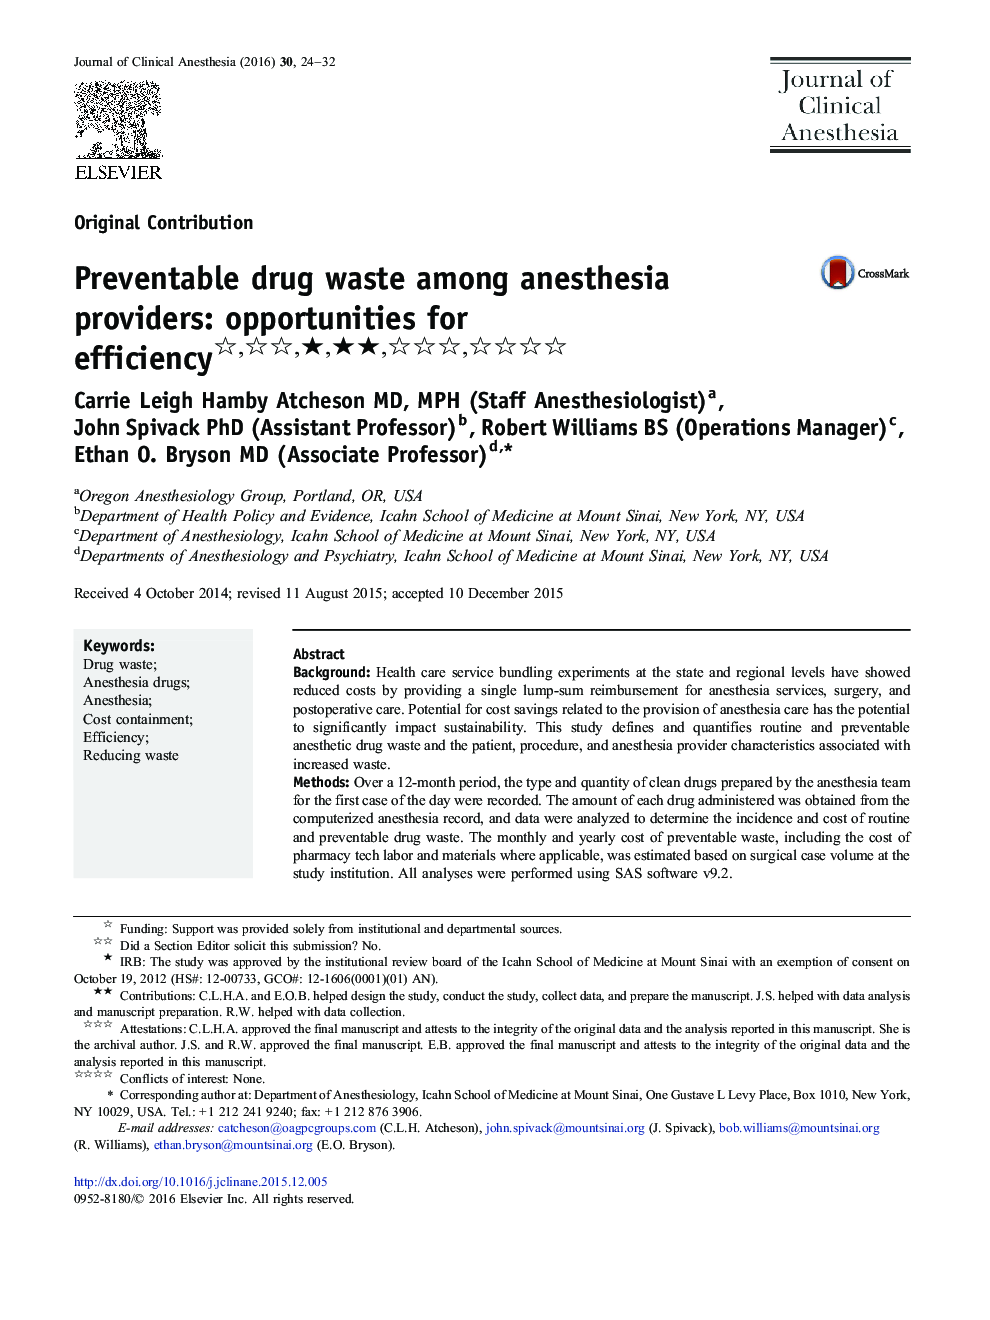 Preventable drug waste among anesthesia providers: opportunities for efficiencyâââ